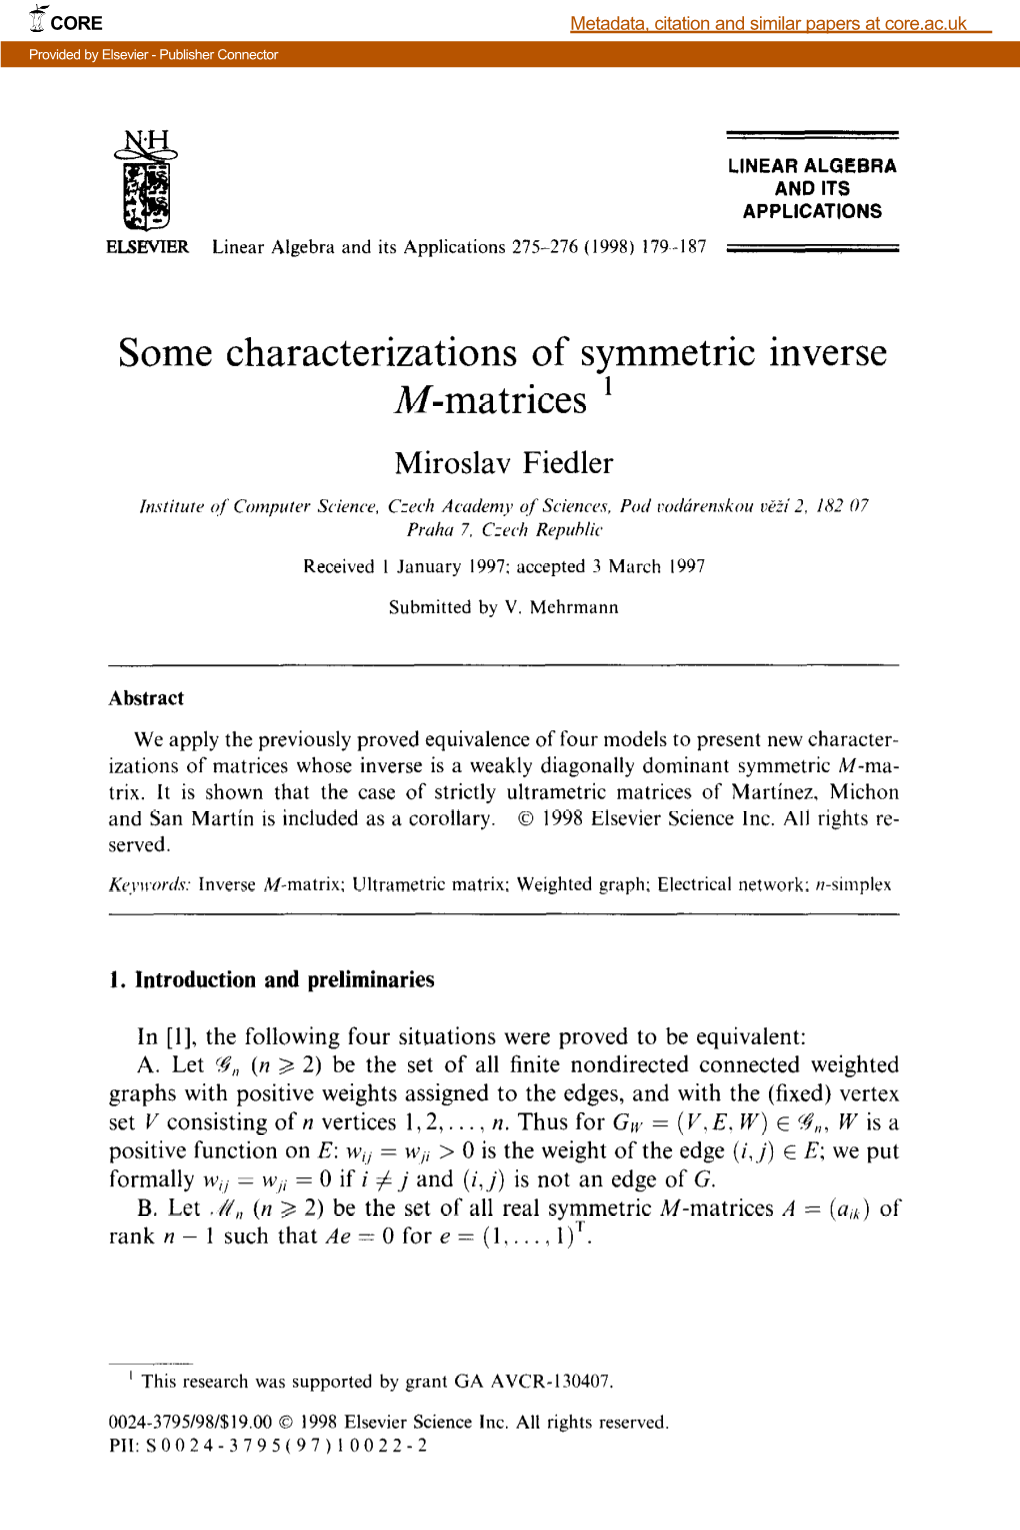 Some Characterizations of Symmetric Inverse M-Matrices '